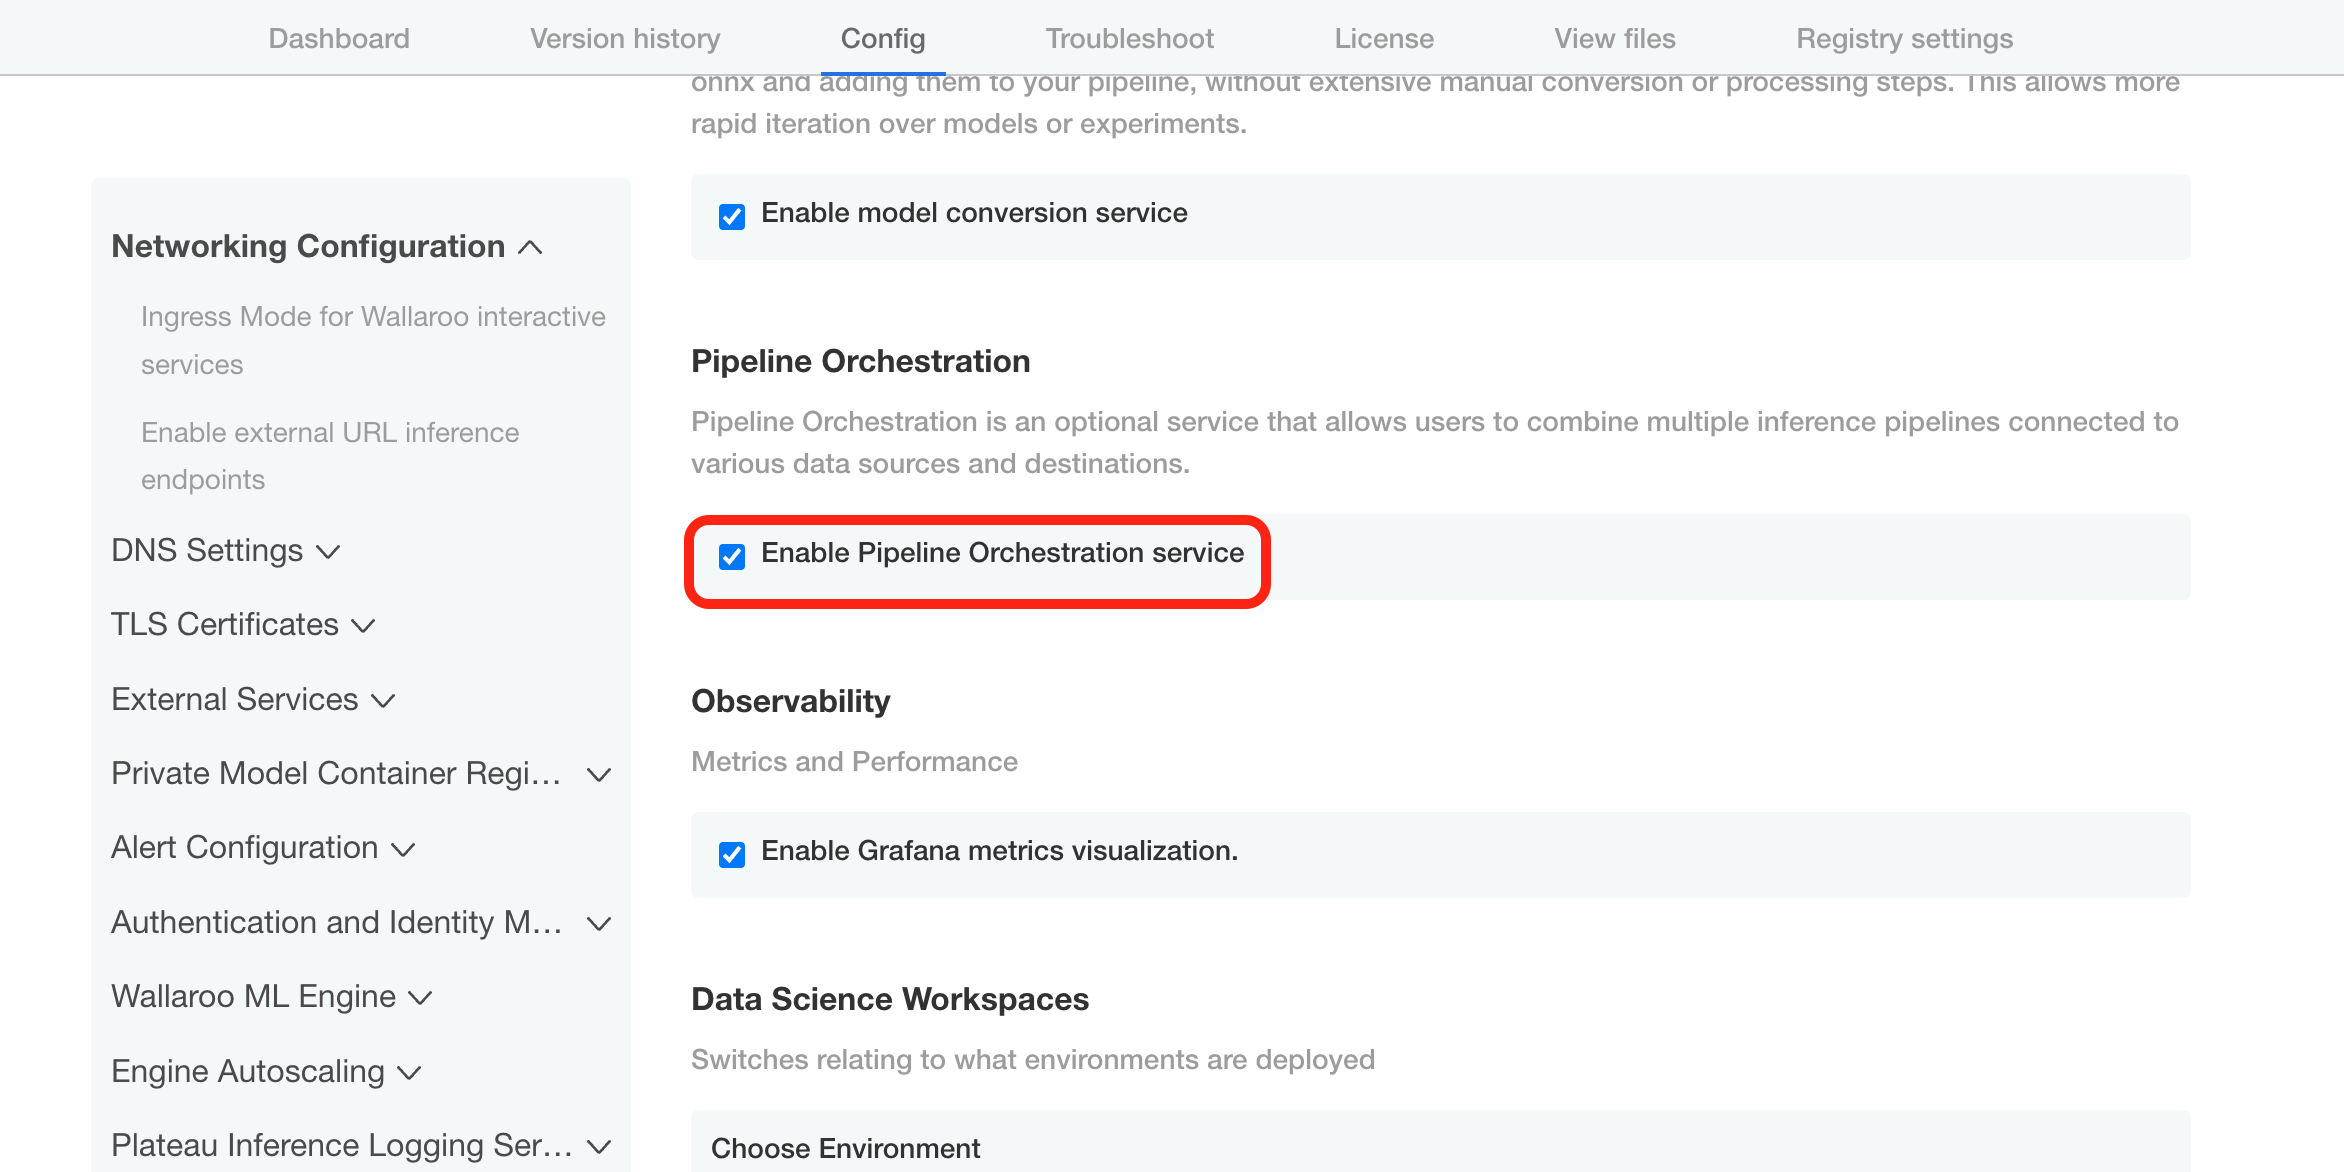 Enable Pipeline Orchestration